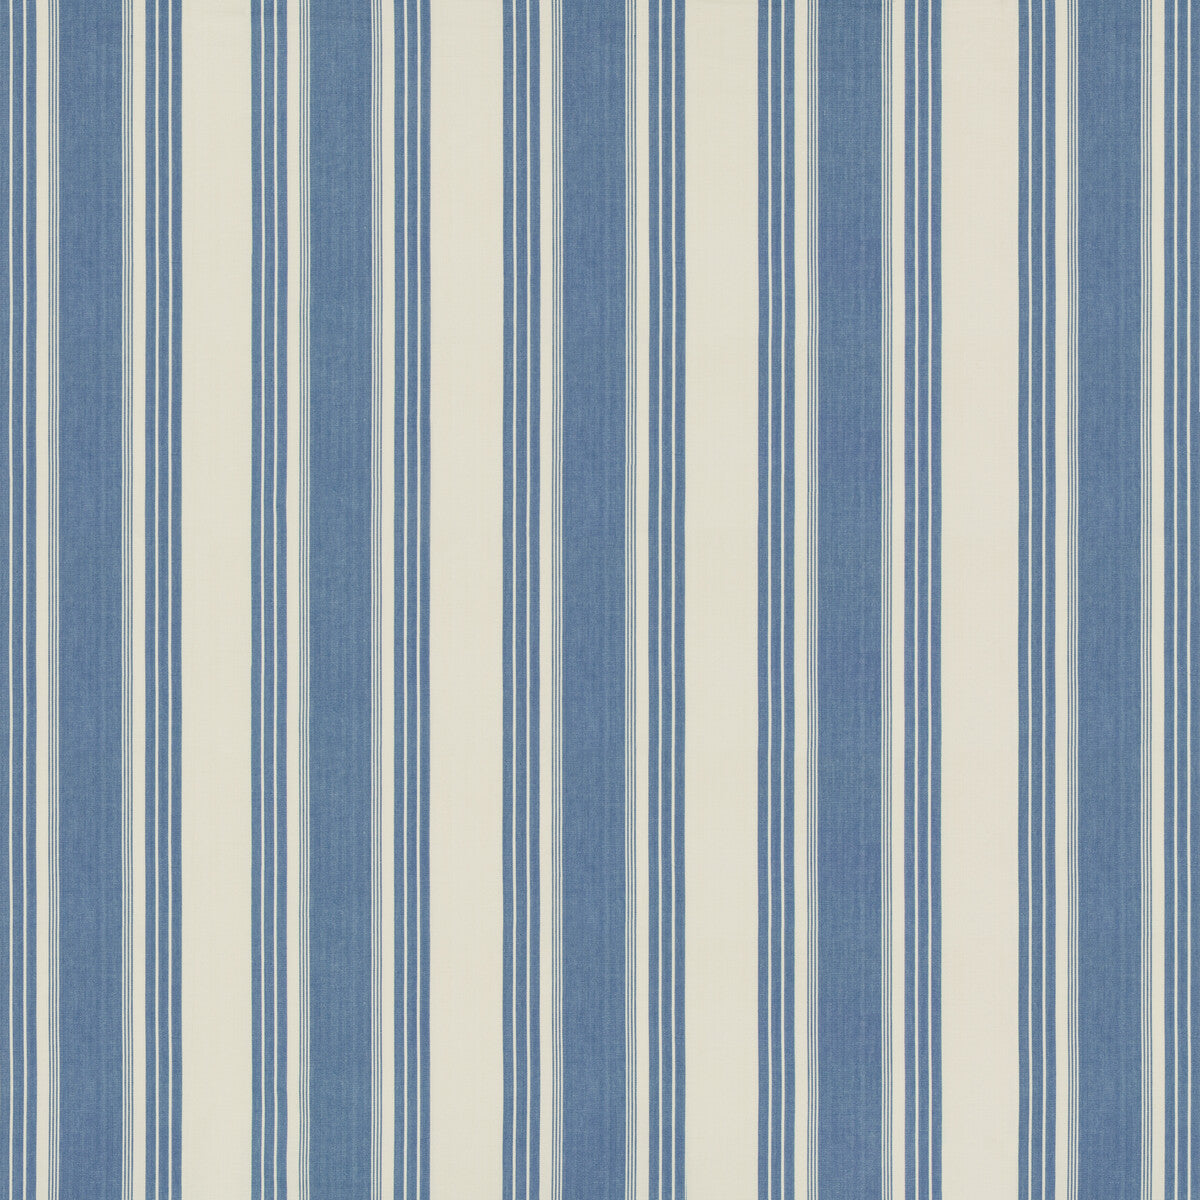 Colmar Stripe fabric in french blue color - pattern 8019110.15.0 - by Brunschwig &amp; Fils in the Folio Francais collection